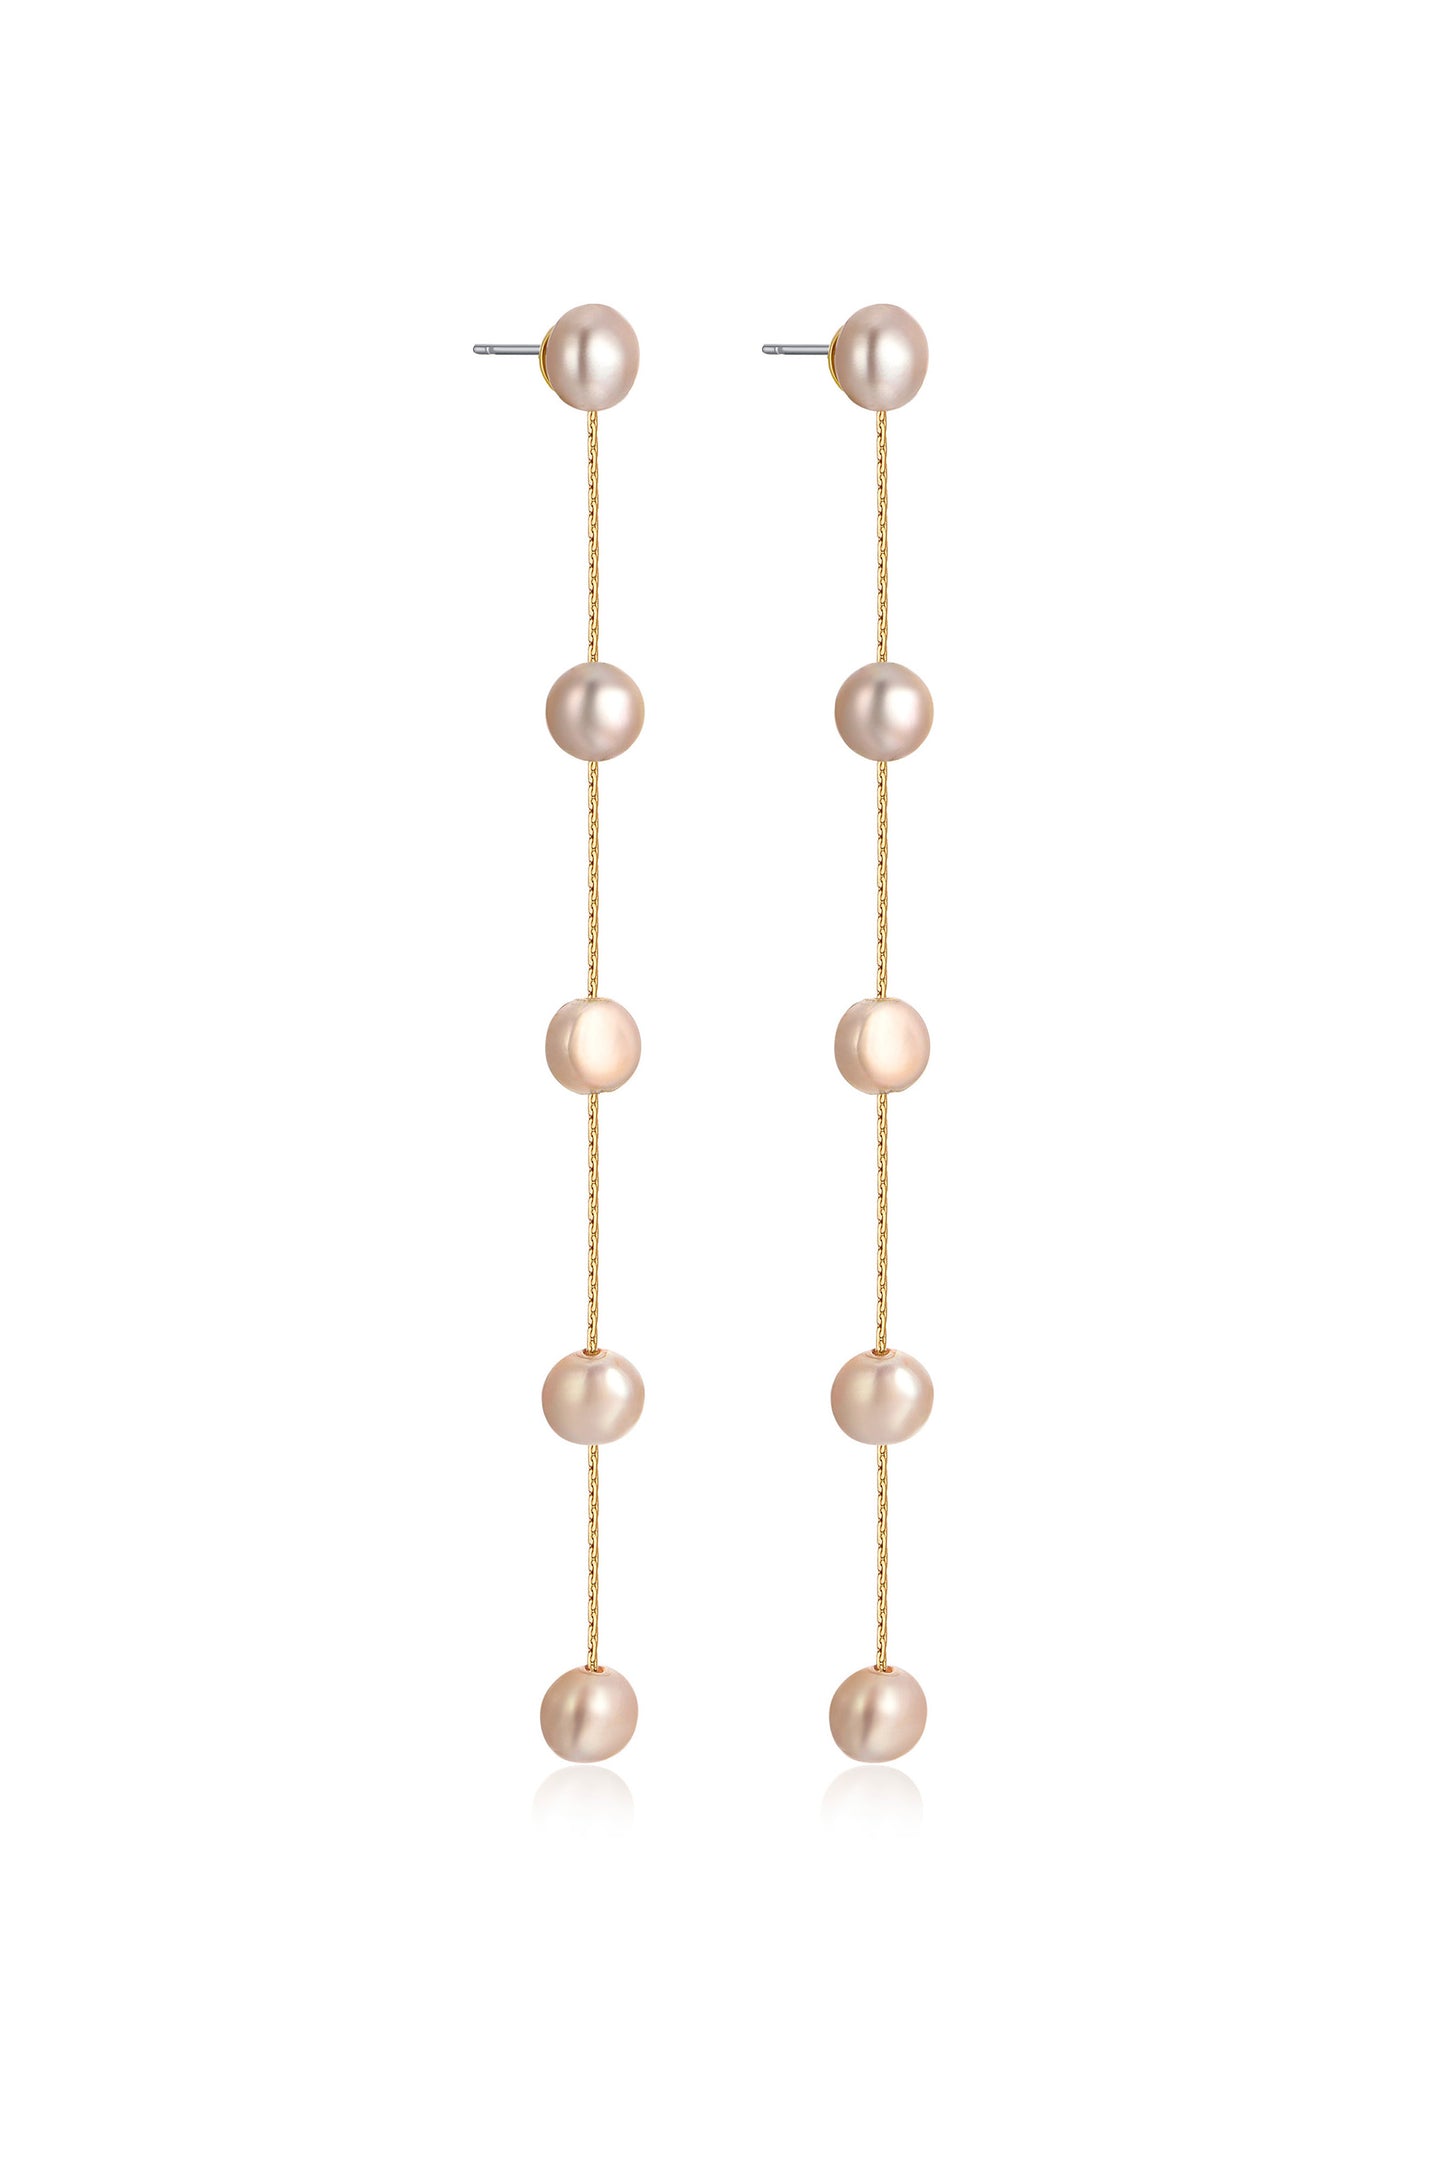 Dripping Pearl Delicate Drop Earrings champagne pearl gold chain side view